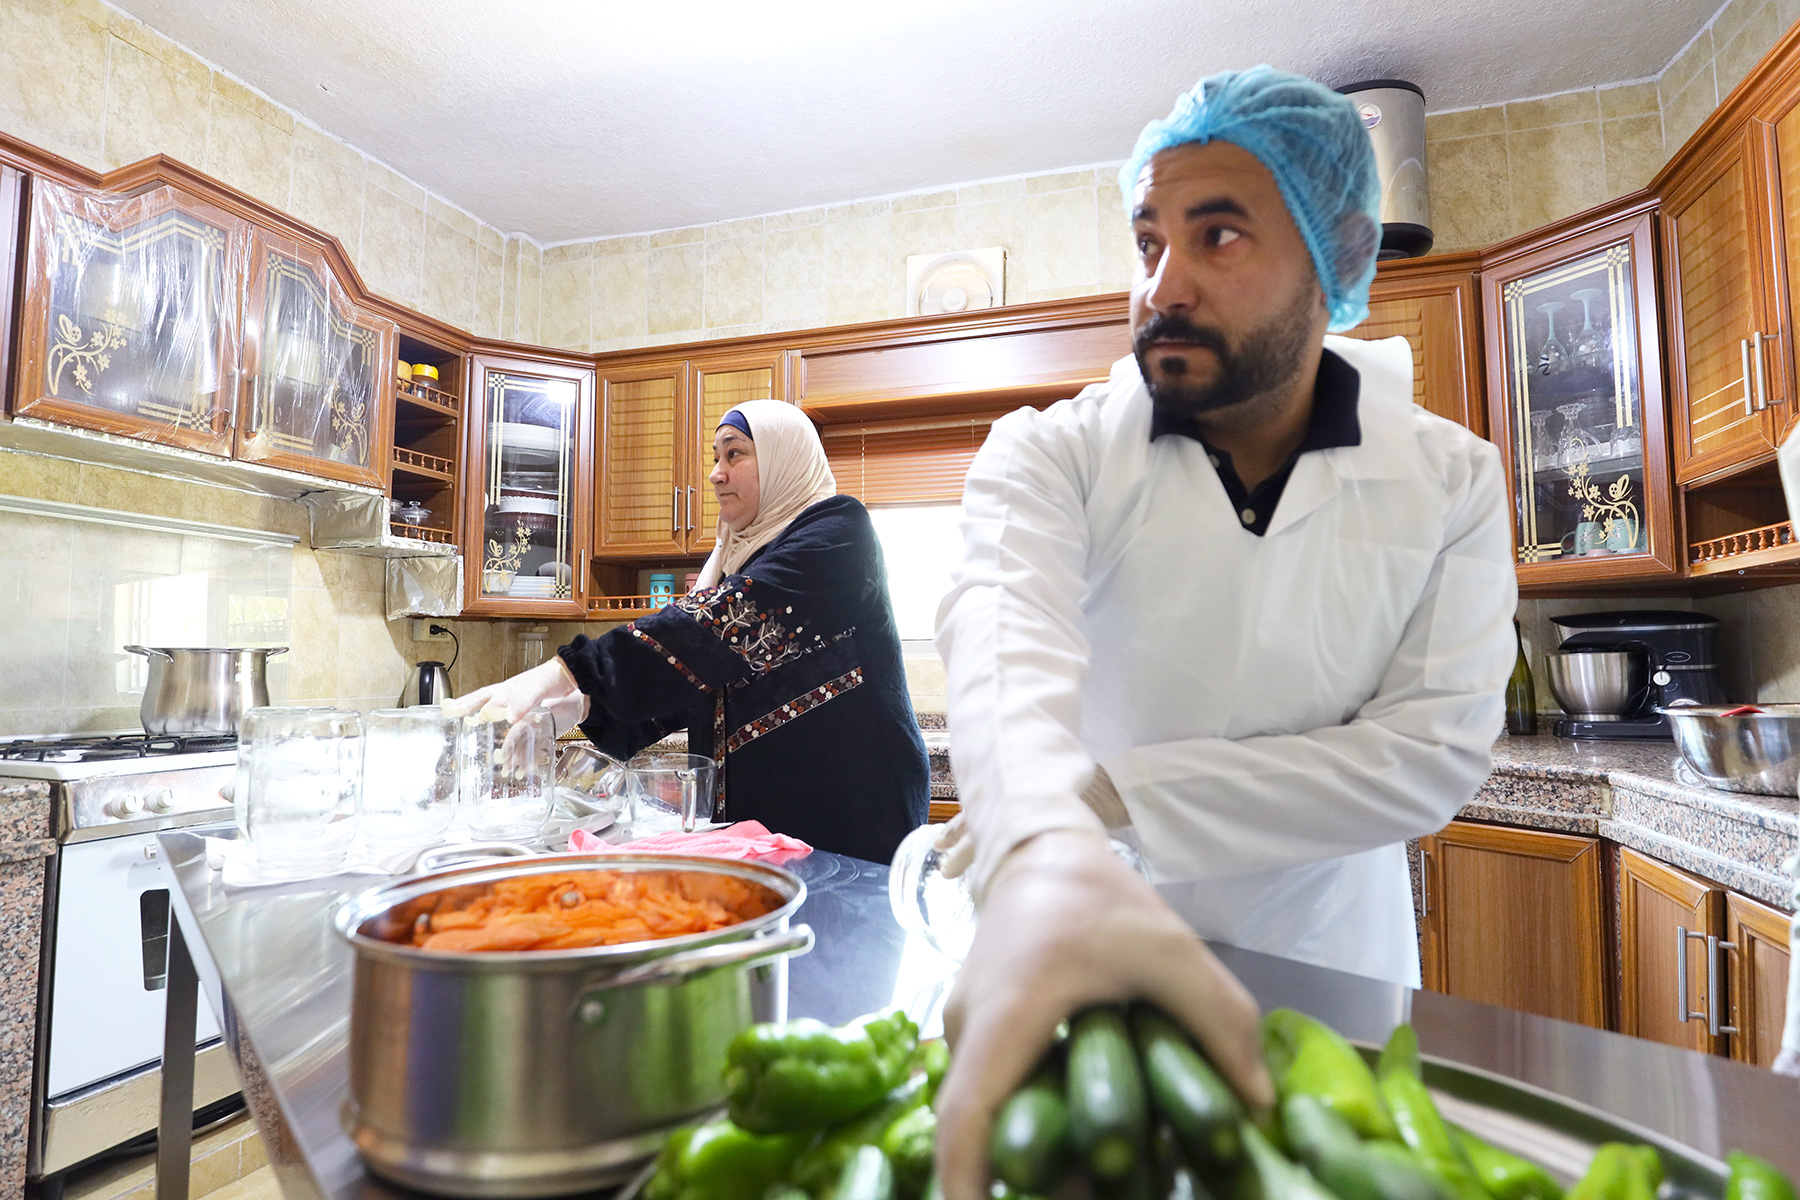 Working From Home: A Young Jordanian’s Home-Based Pickling Business